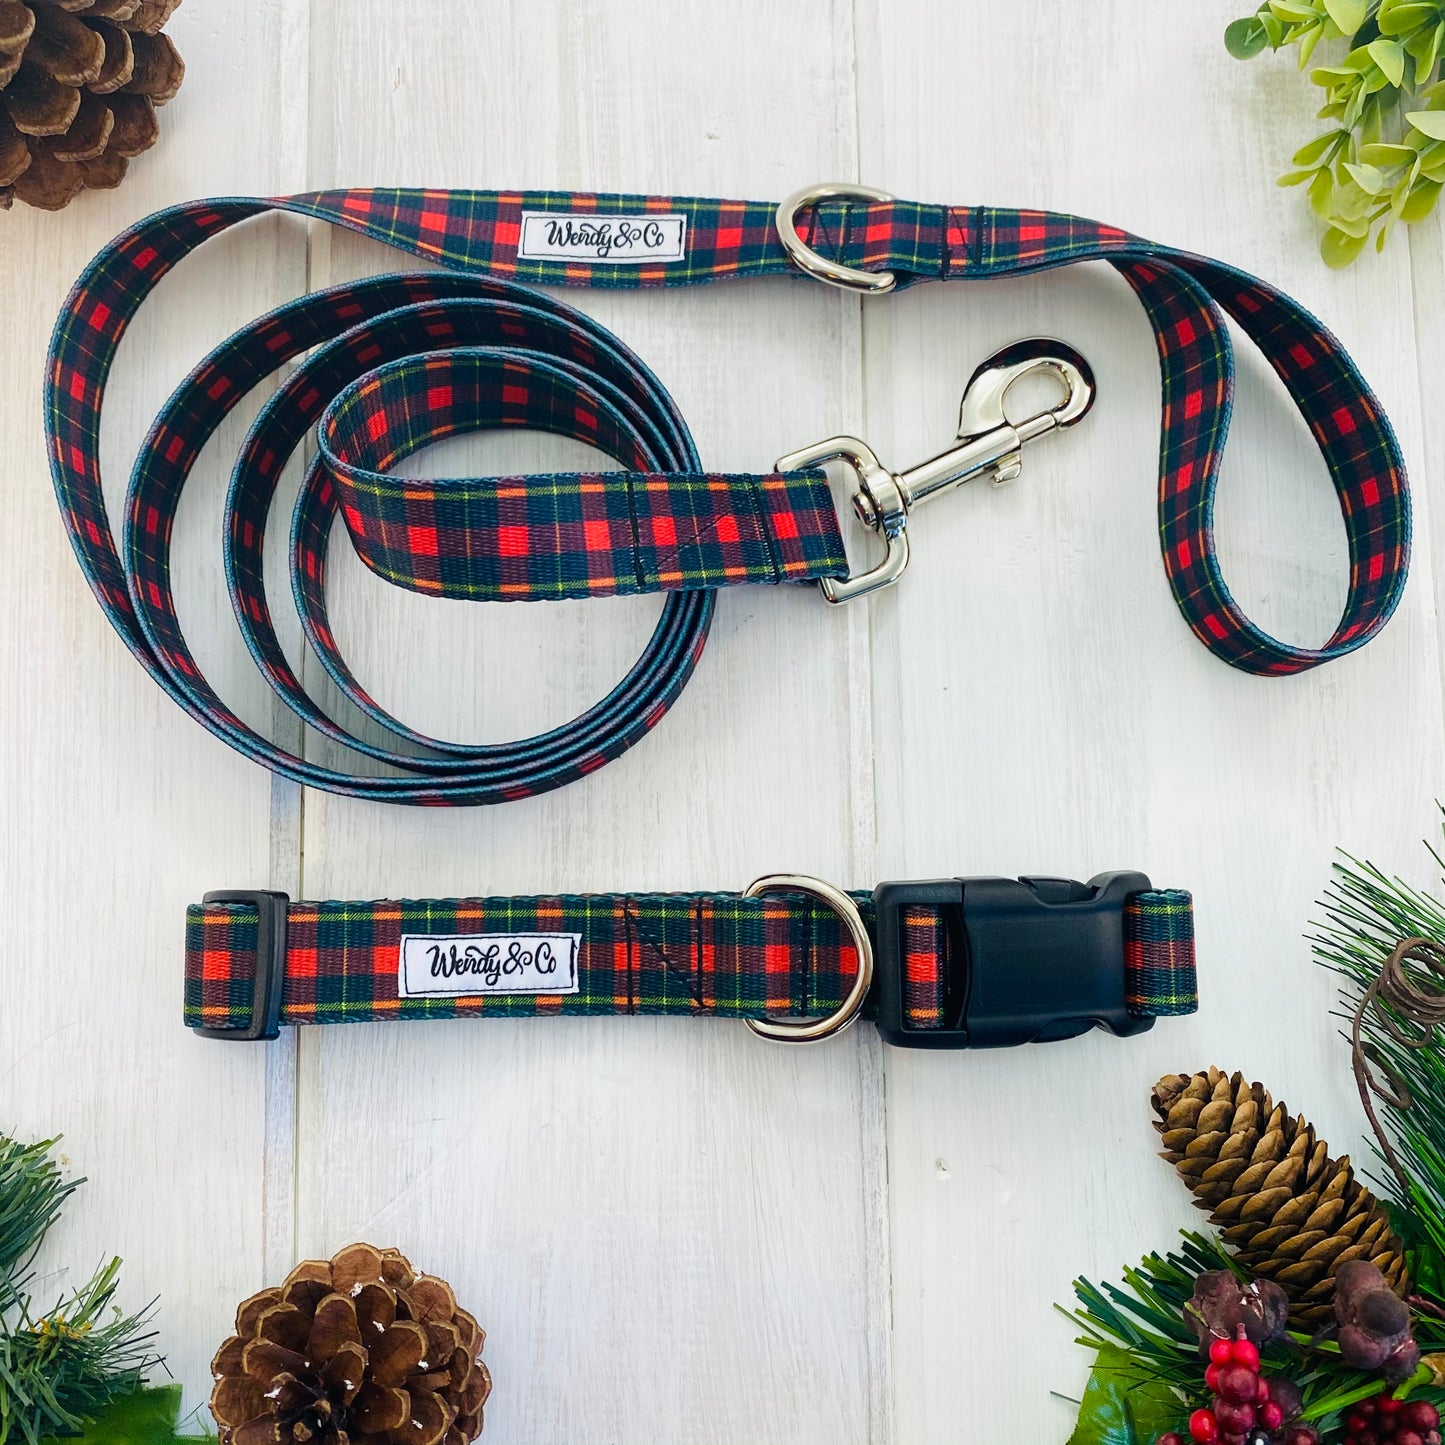 Red and black plaid print dog collar and leash.